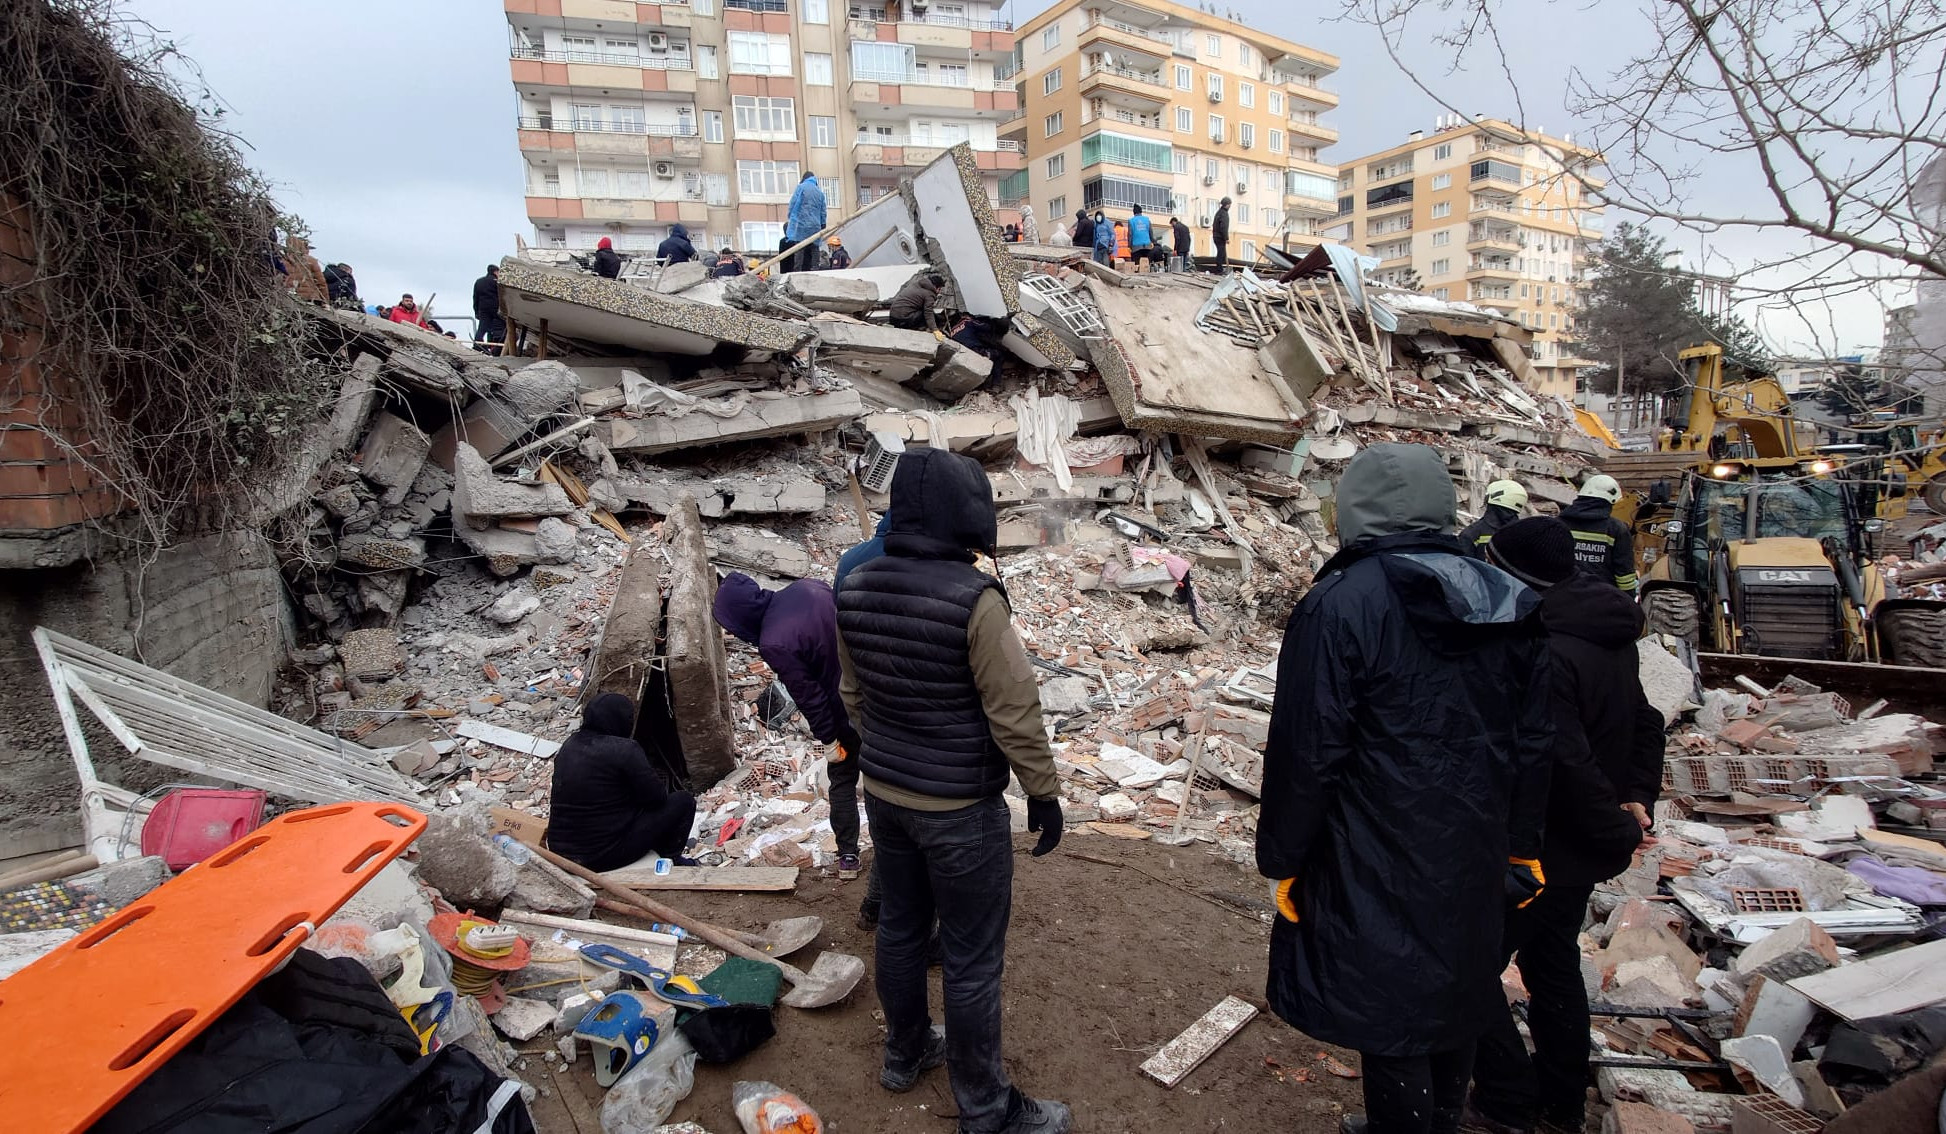 The number of earthquake victims has risen to 812 deaths in Syria